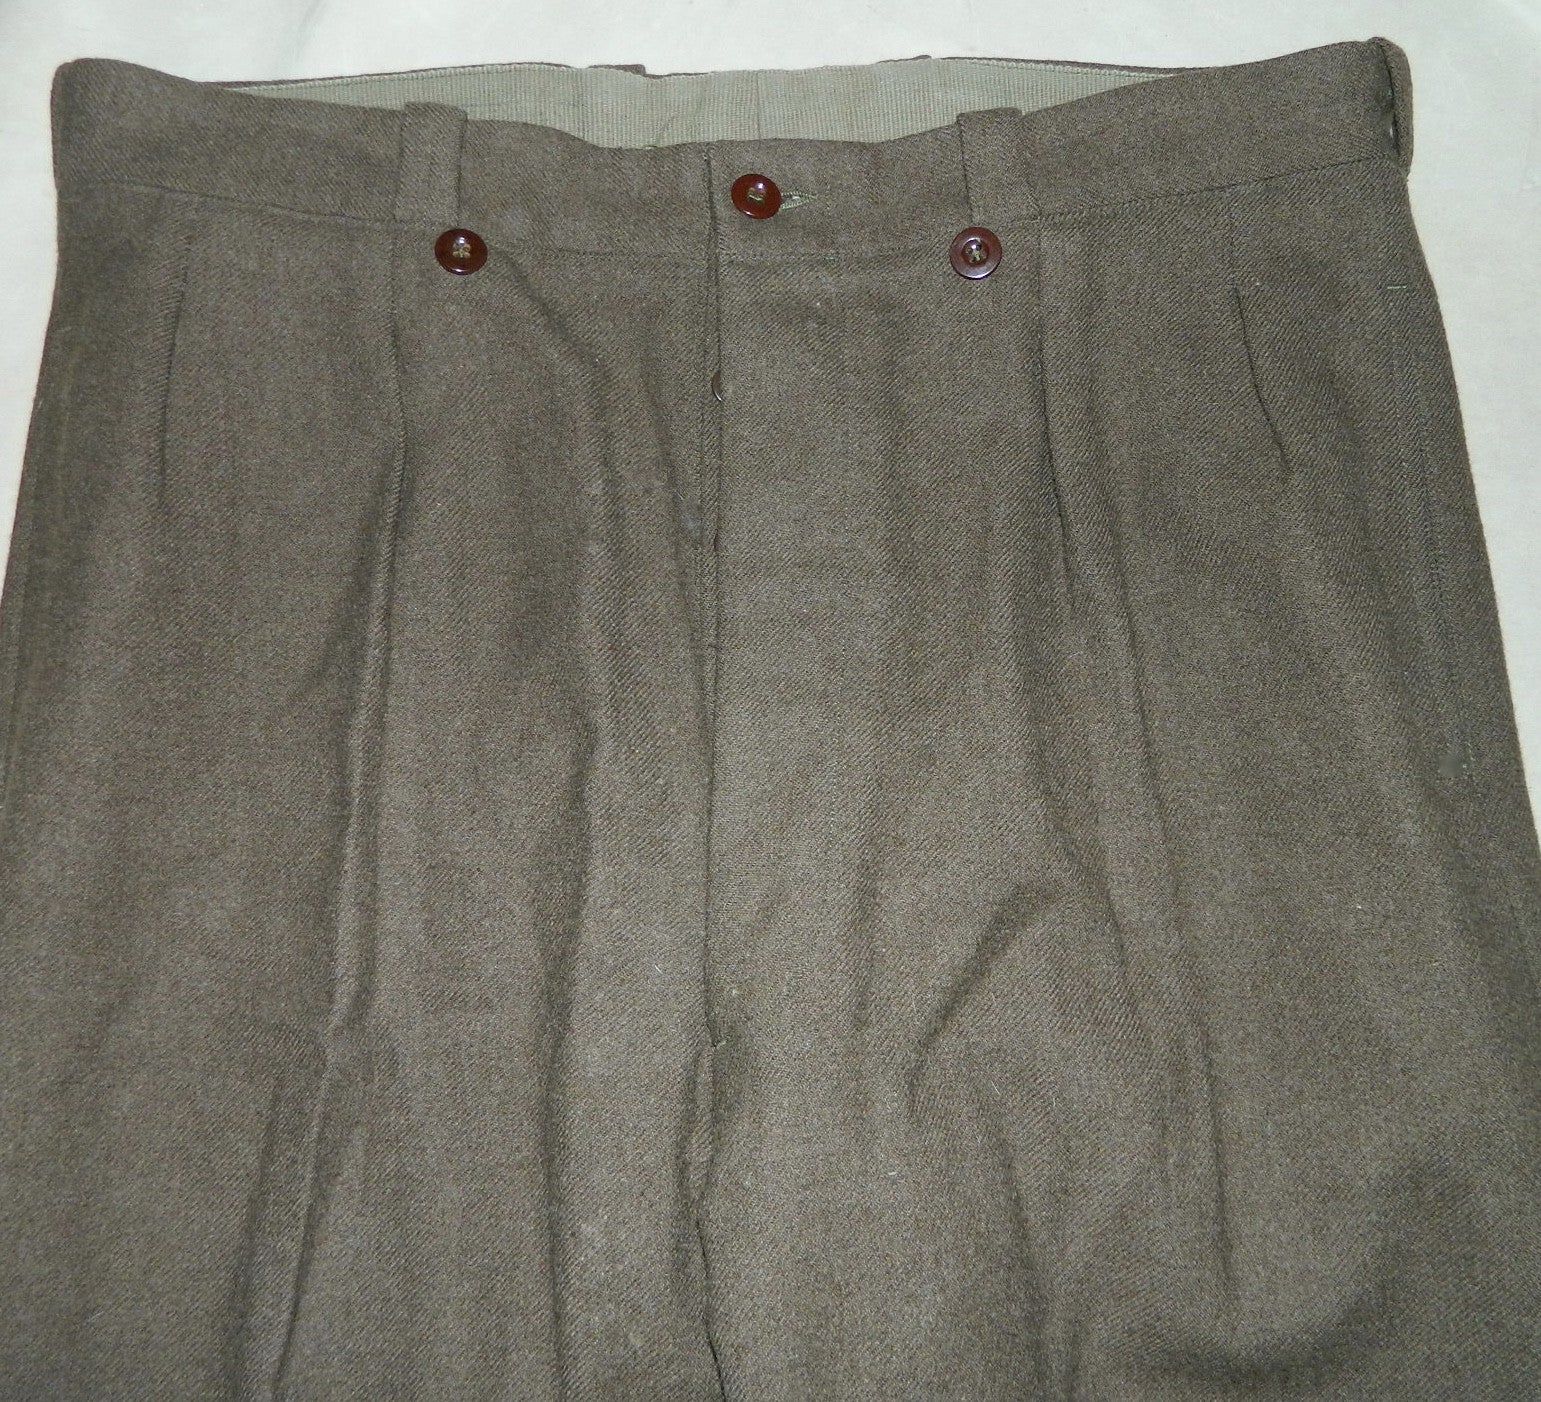 vintage 1940s French military pants WWII wool trousers OD pleated slacks  heavy wool 37 inch waist